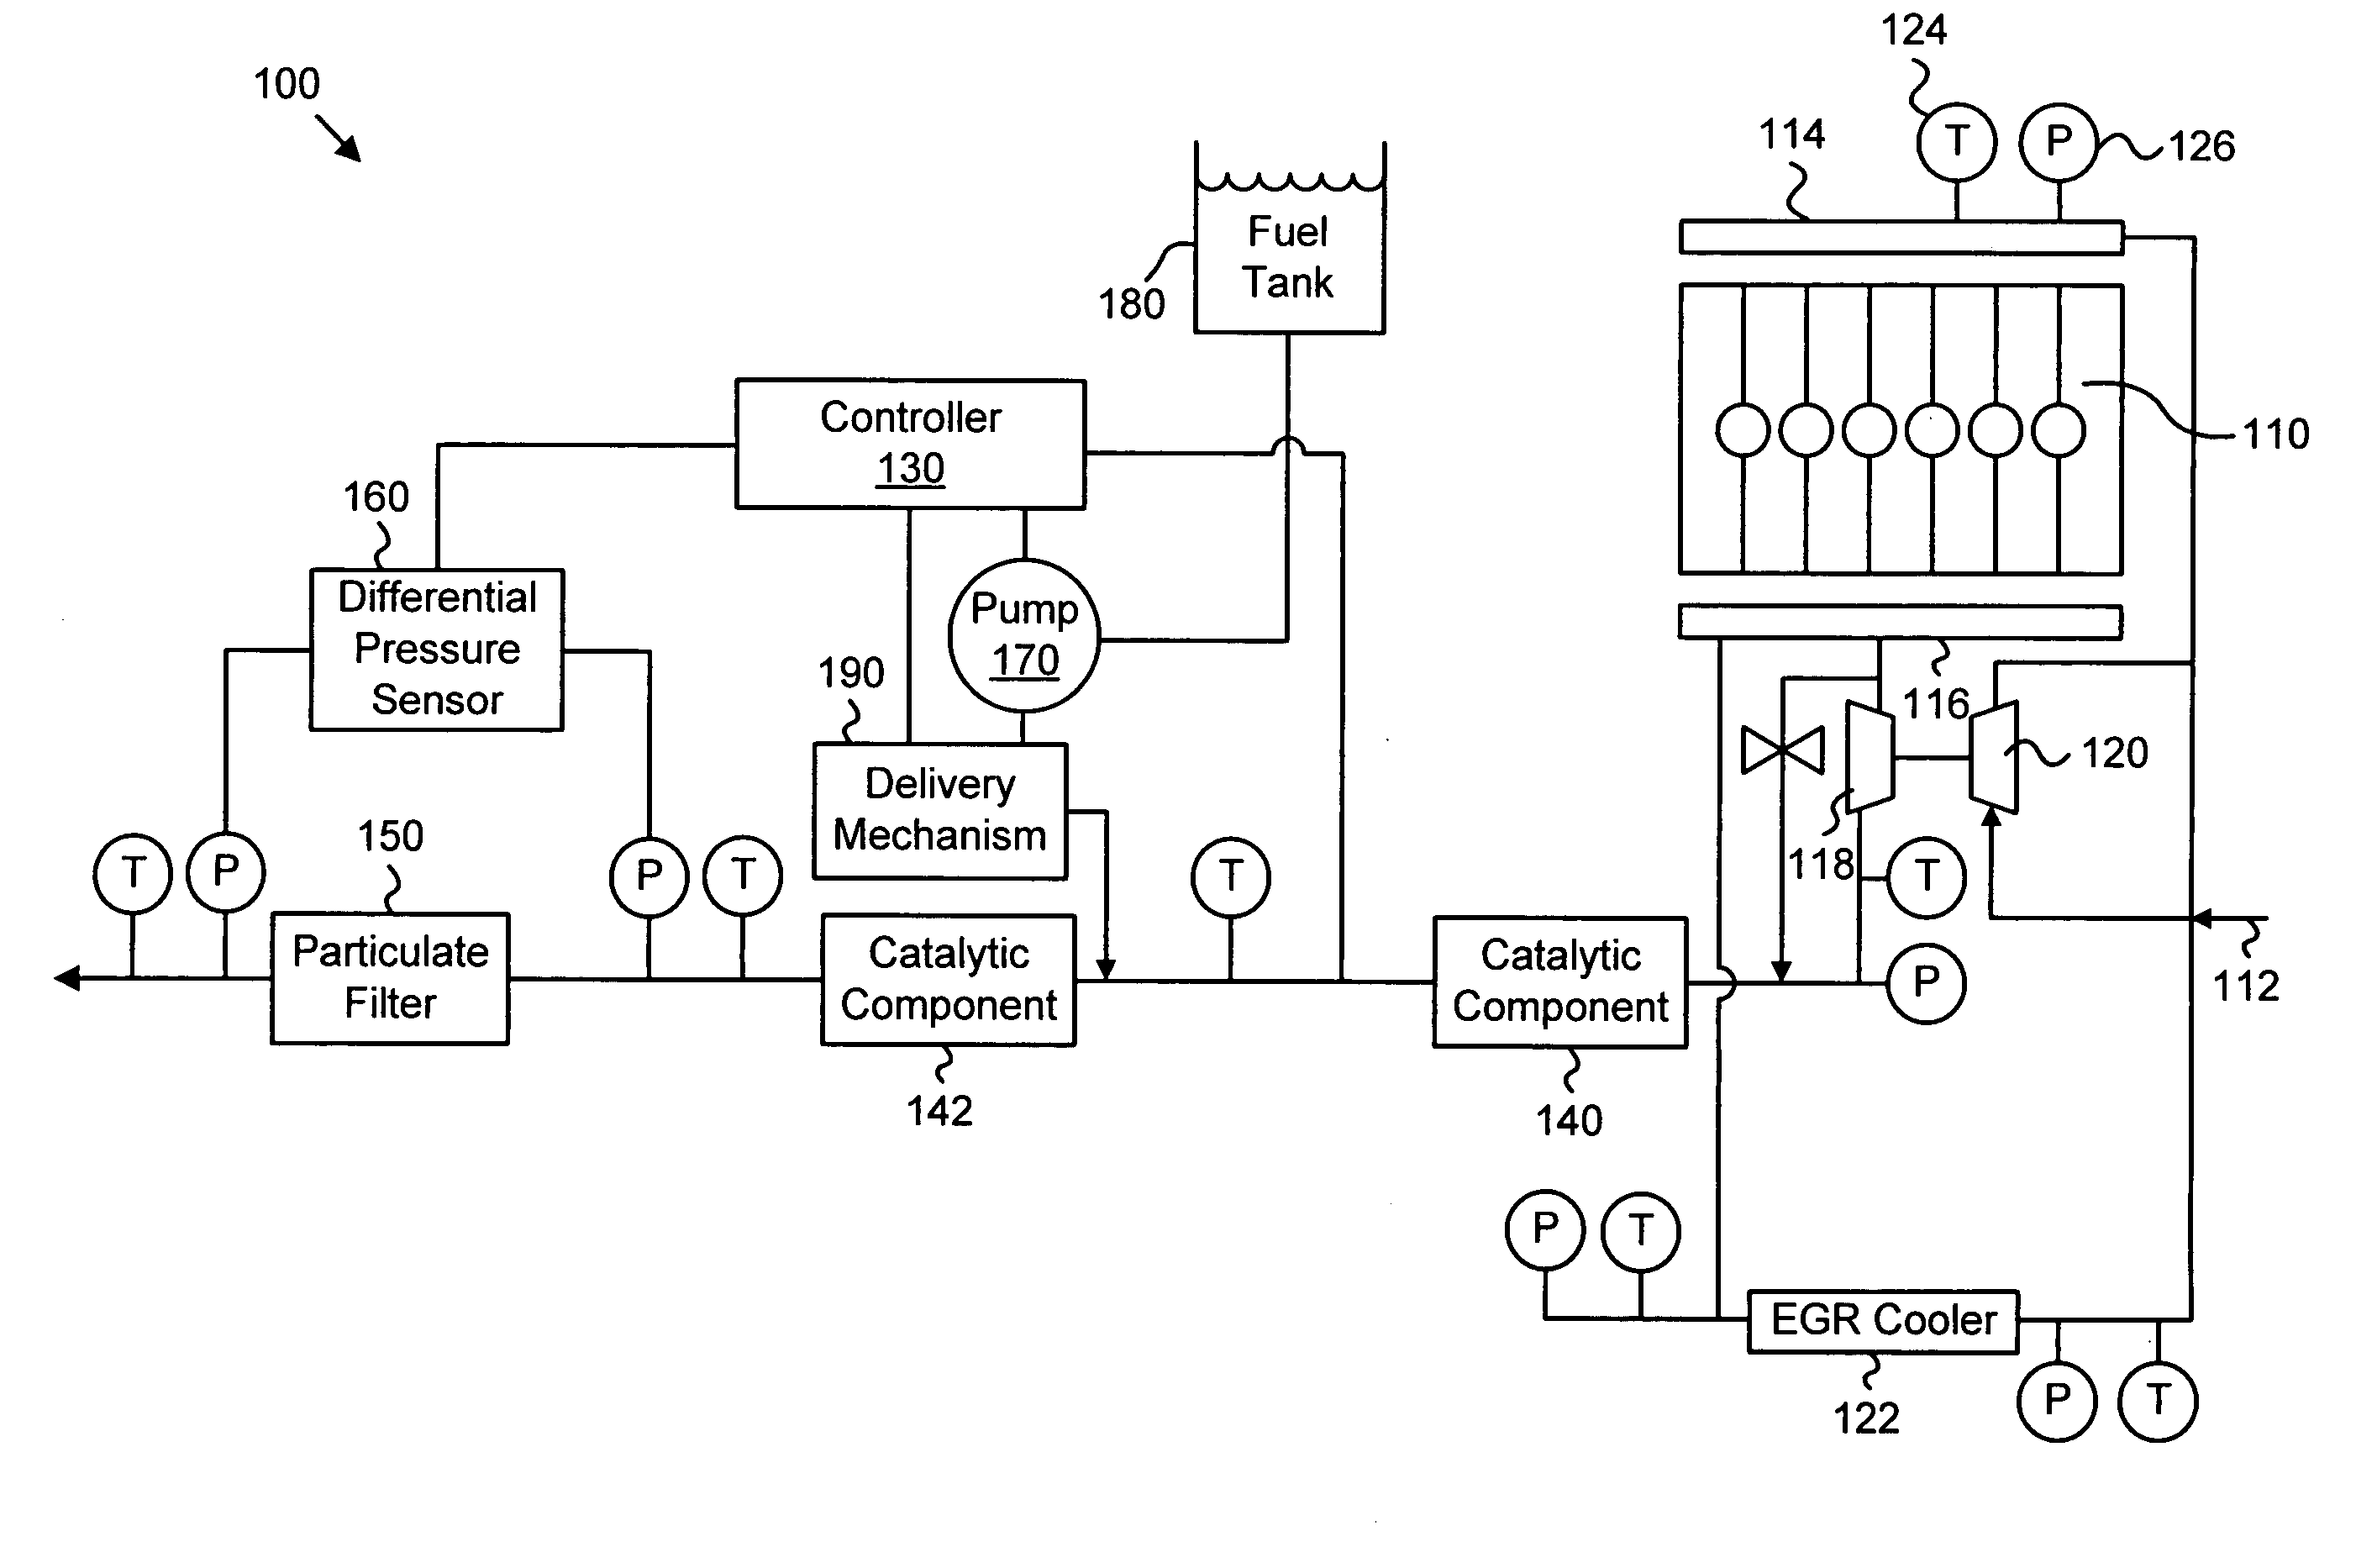 Apparatus, system, and method for detecting and labeling a filter regeneration event